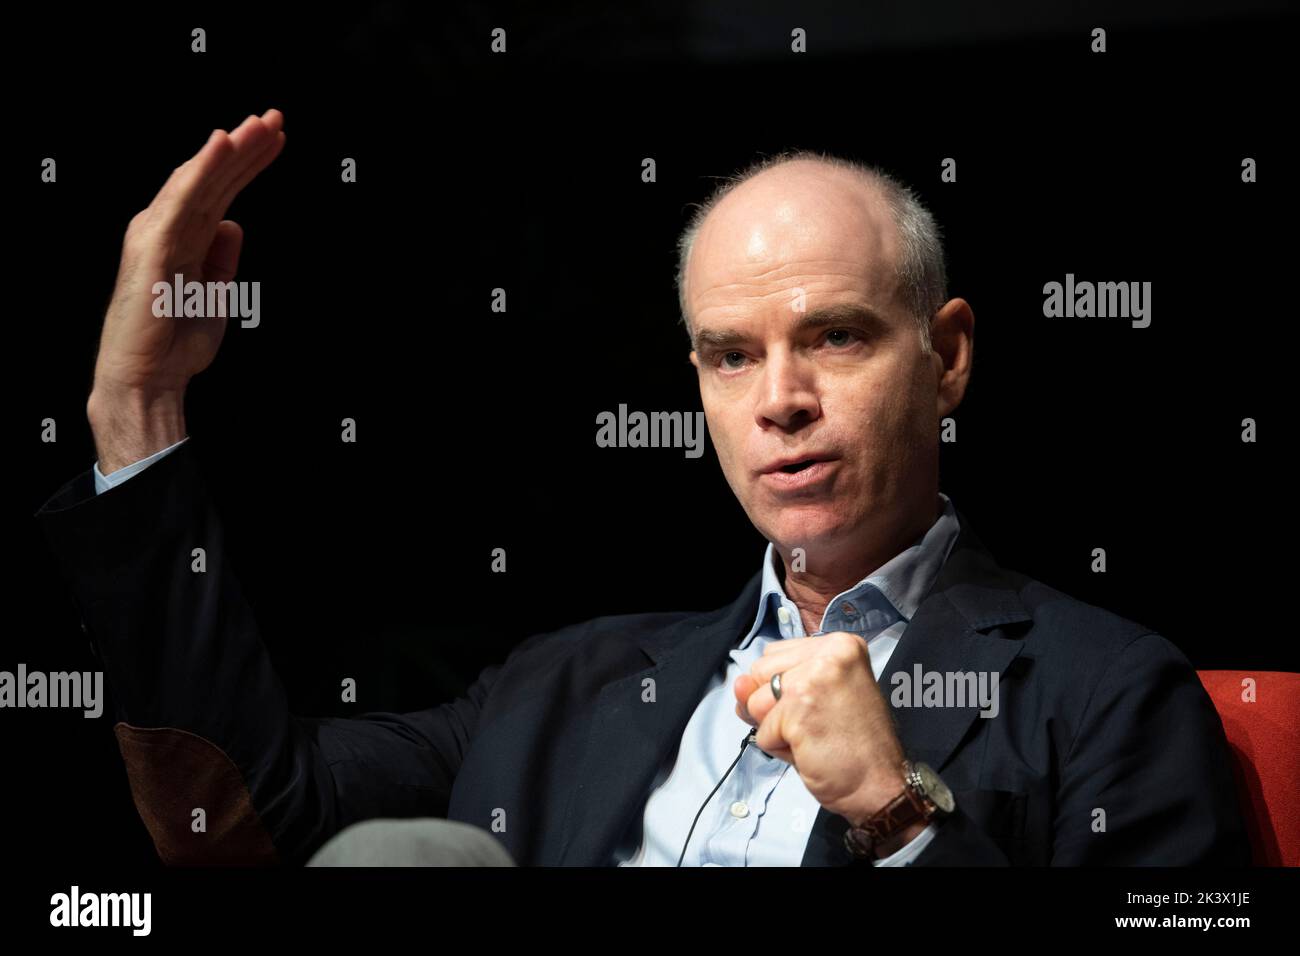 Executive editor of the New York Times, JOE KAHN, makes a point during an interview session at the annual Texas Tribune Festival in downtown Austin on September 24, 2022. Stock Photo